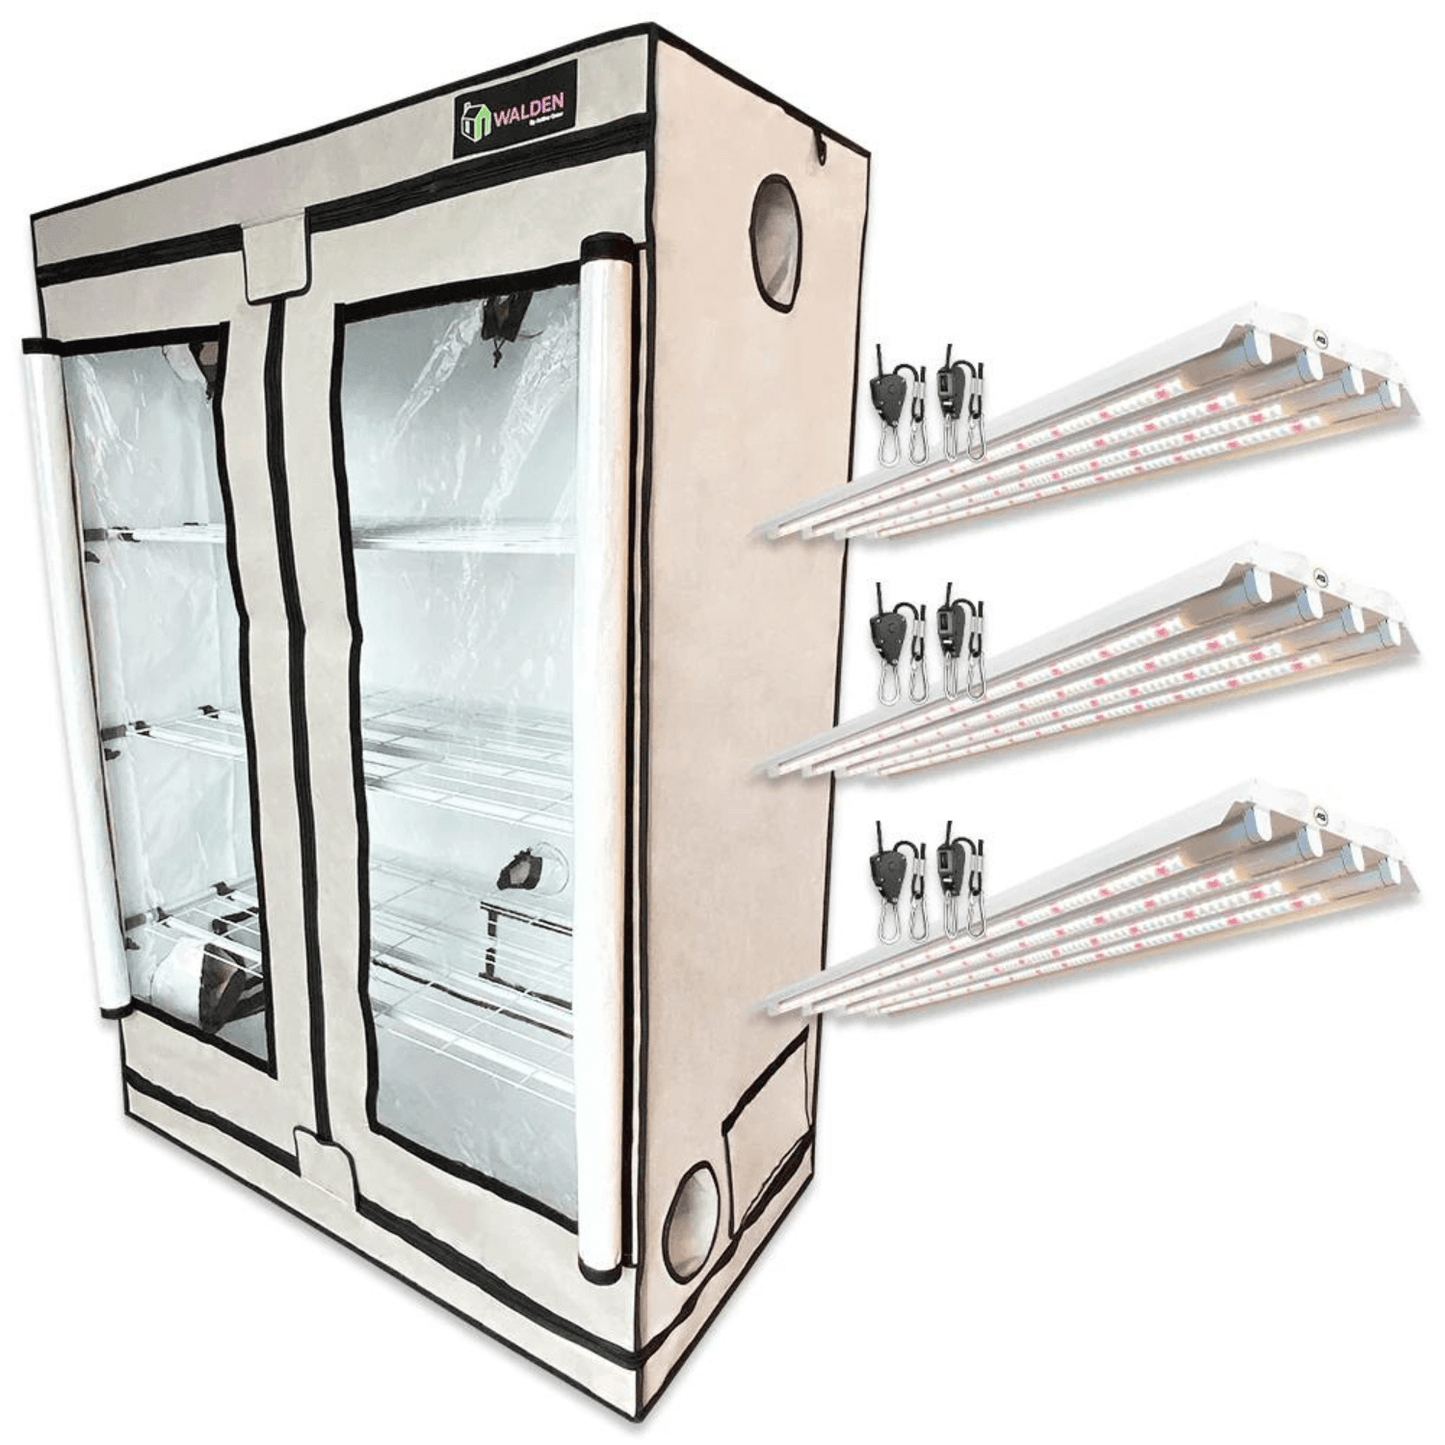 Active Grow Vegetables & Greens High Intensity 2' x 4' 3-Tier LED Walden White Grow Tent Kit | AG/24TENT/W/3S/VK | Grow Tents Depot | Grow Tent Kits | 769947348209